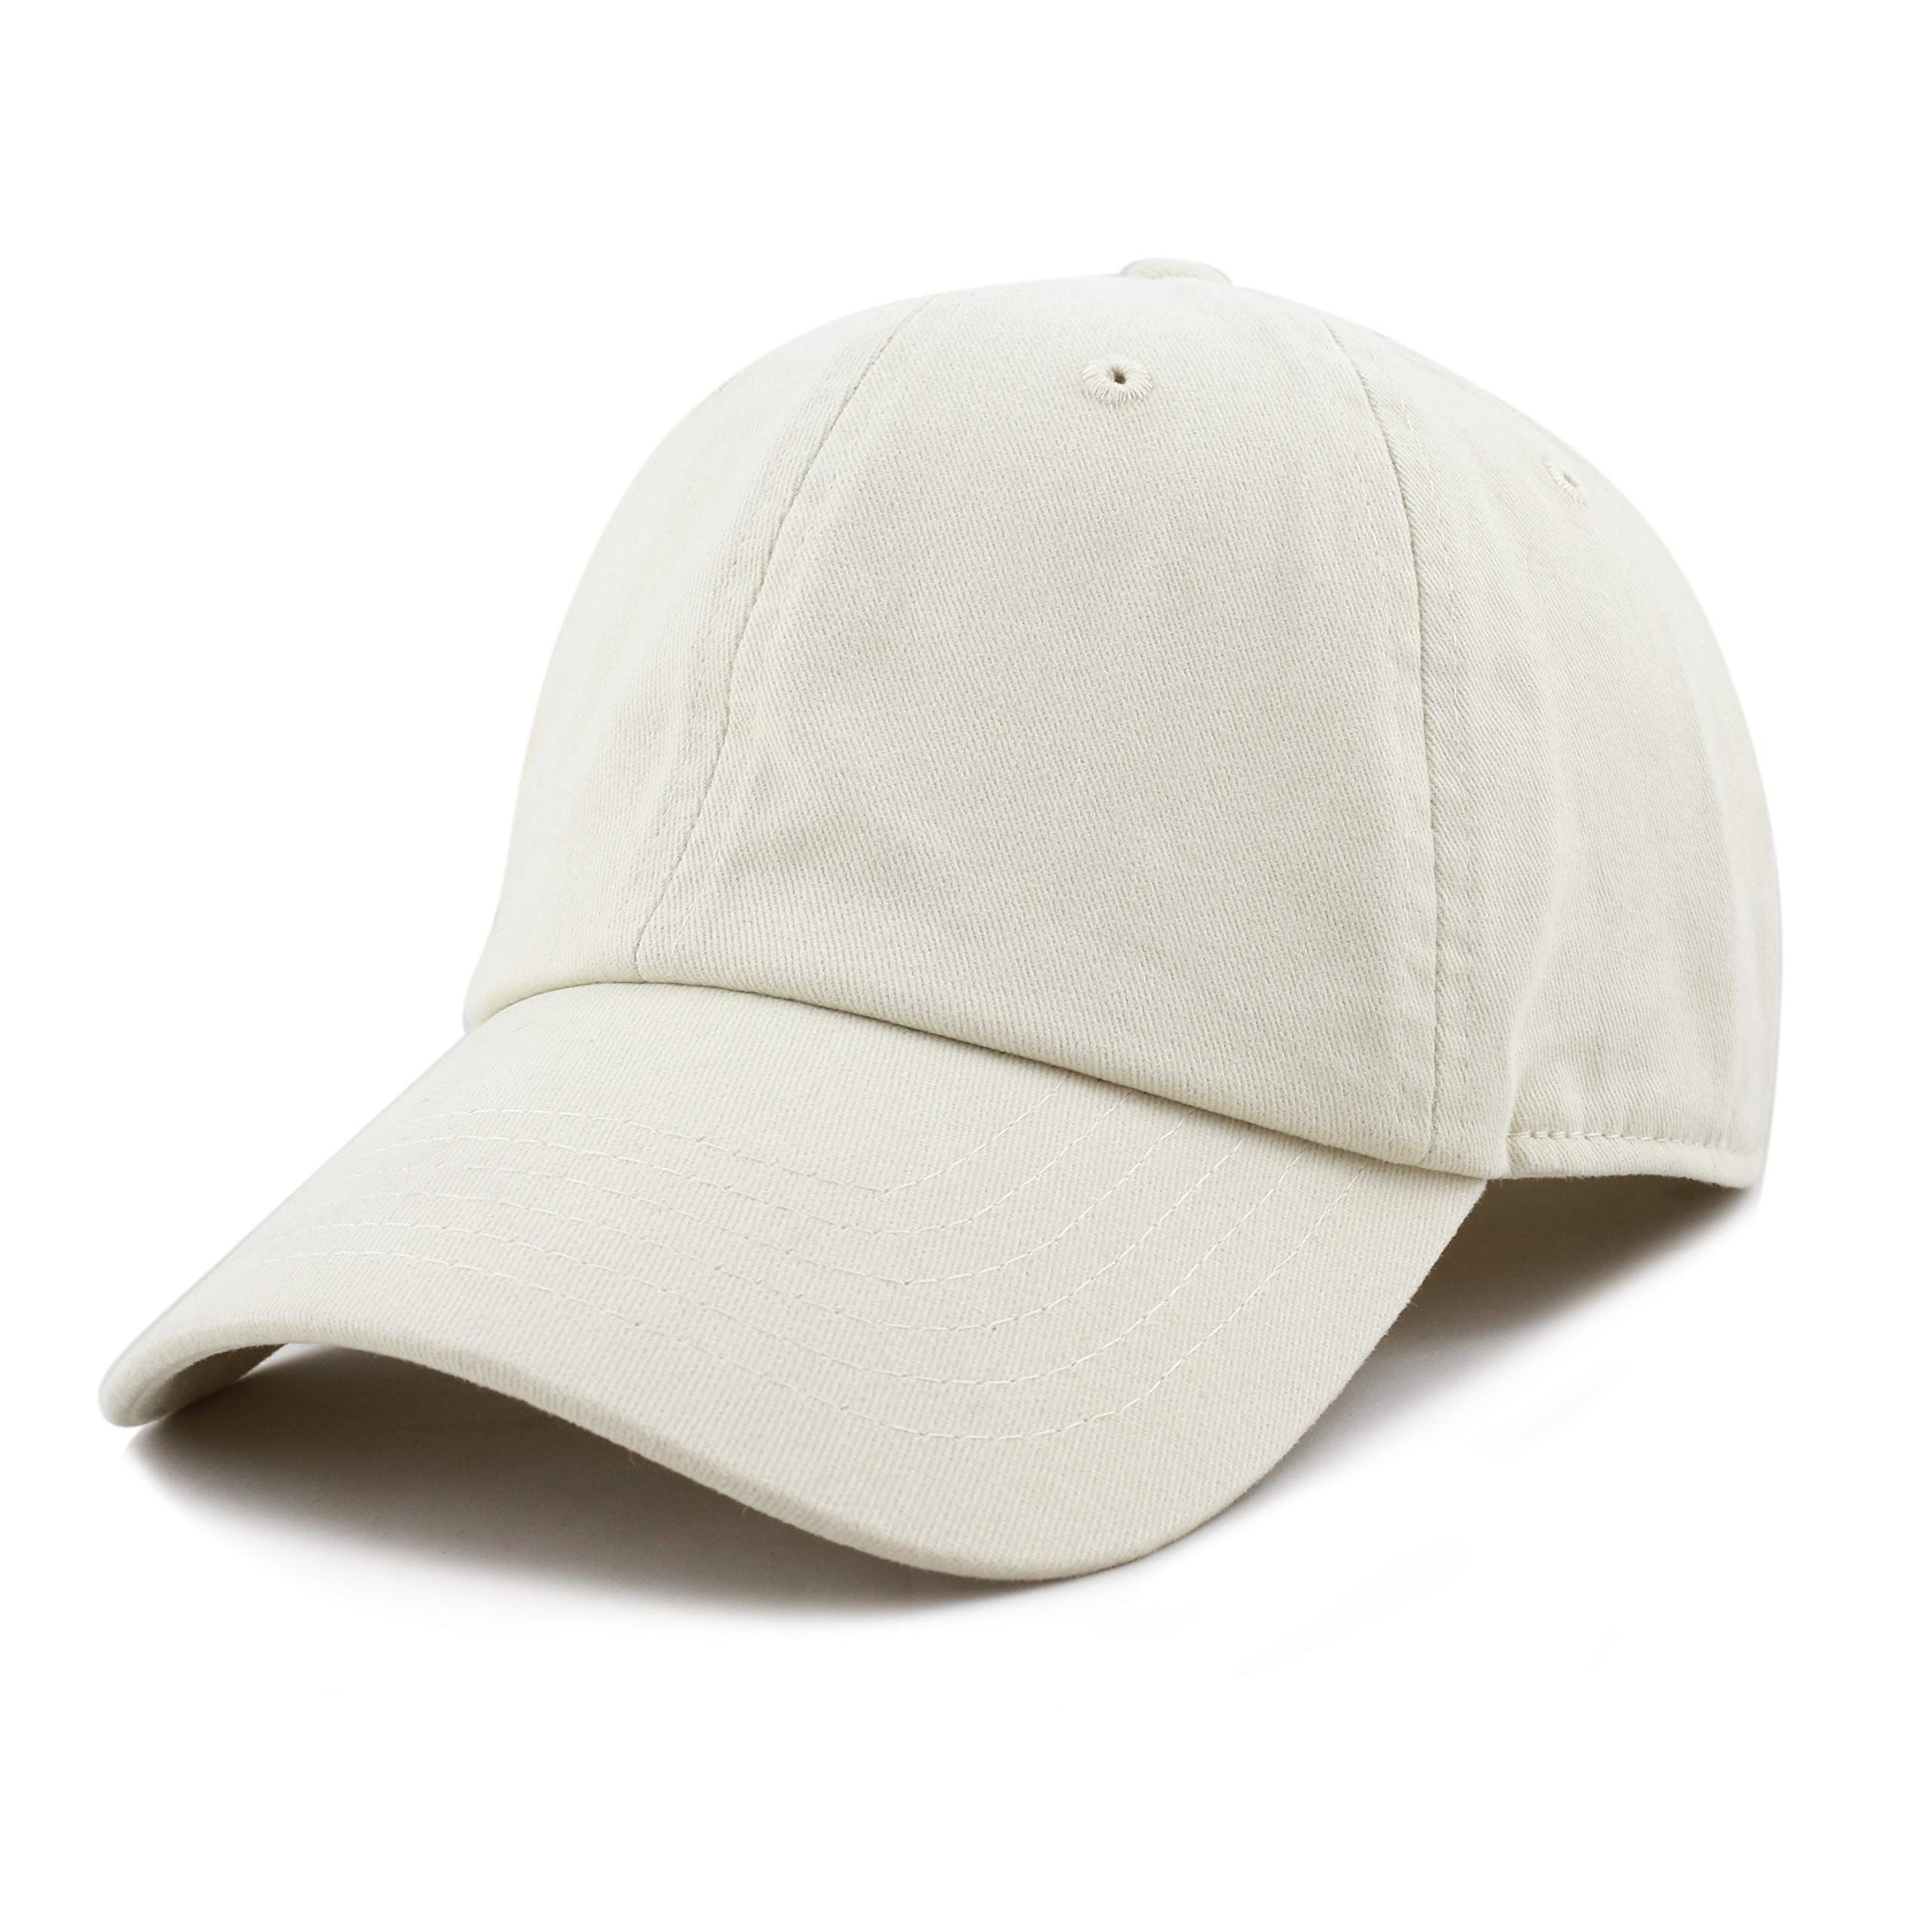 The Hat Depot Baseball Cap Dad Hats 100% Soft Brushed Cotton Unstructured Solid Low-Profile | Amazon (US)